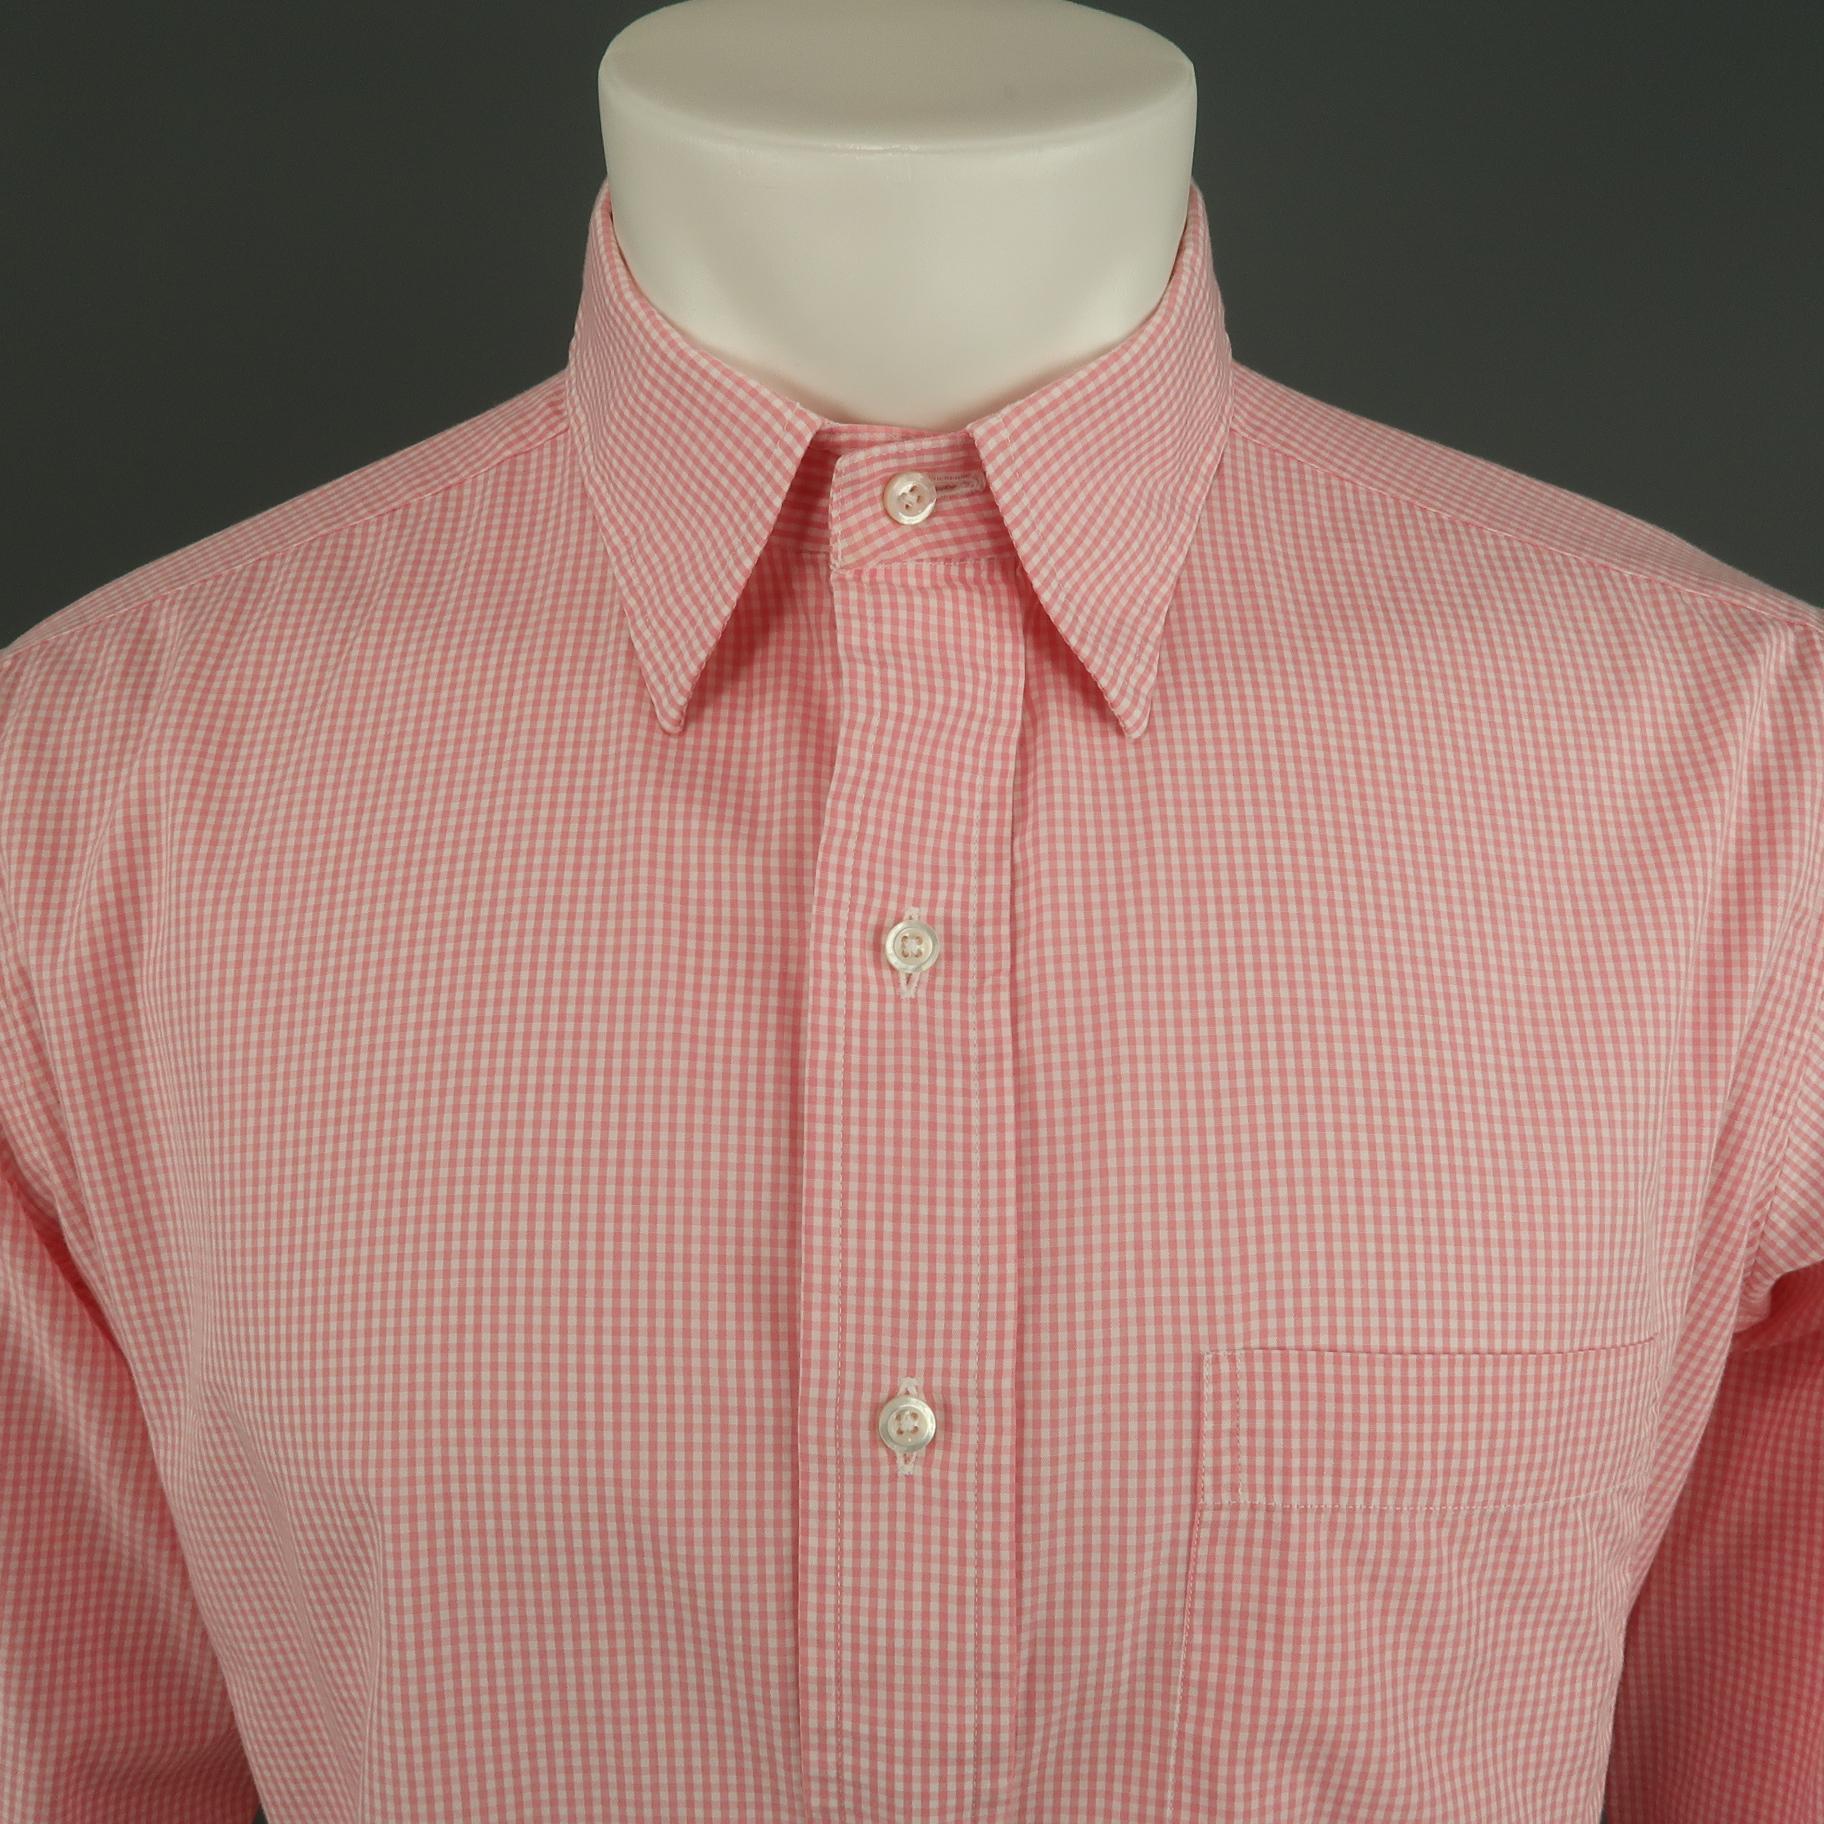 THOM BROWNE long sleeve shirt comes in a pink and white plaid cotton featuring a classic button up style, spread collar. and front patch pocket. Made in USA.
 
Excellent Pre-Owned Condition.
Marked: 4
 
Measurements:
 
Shoulder: 18.5 in.
Chest: 46